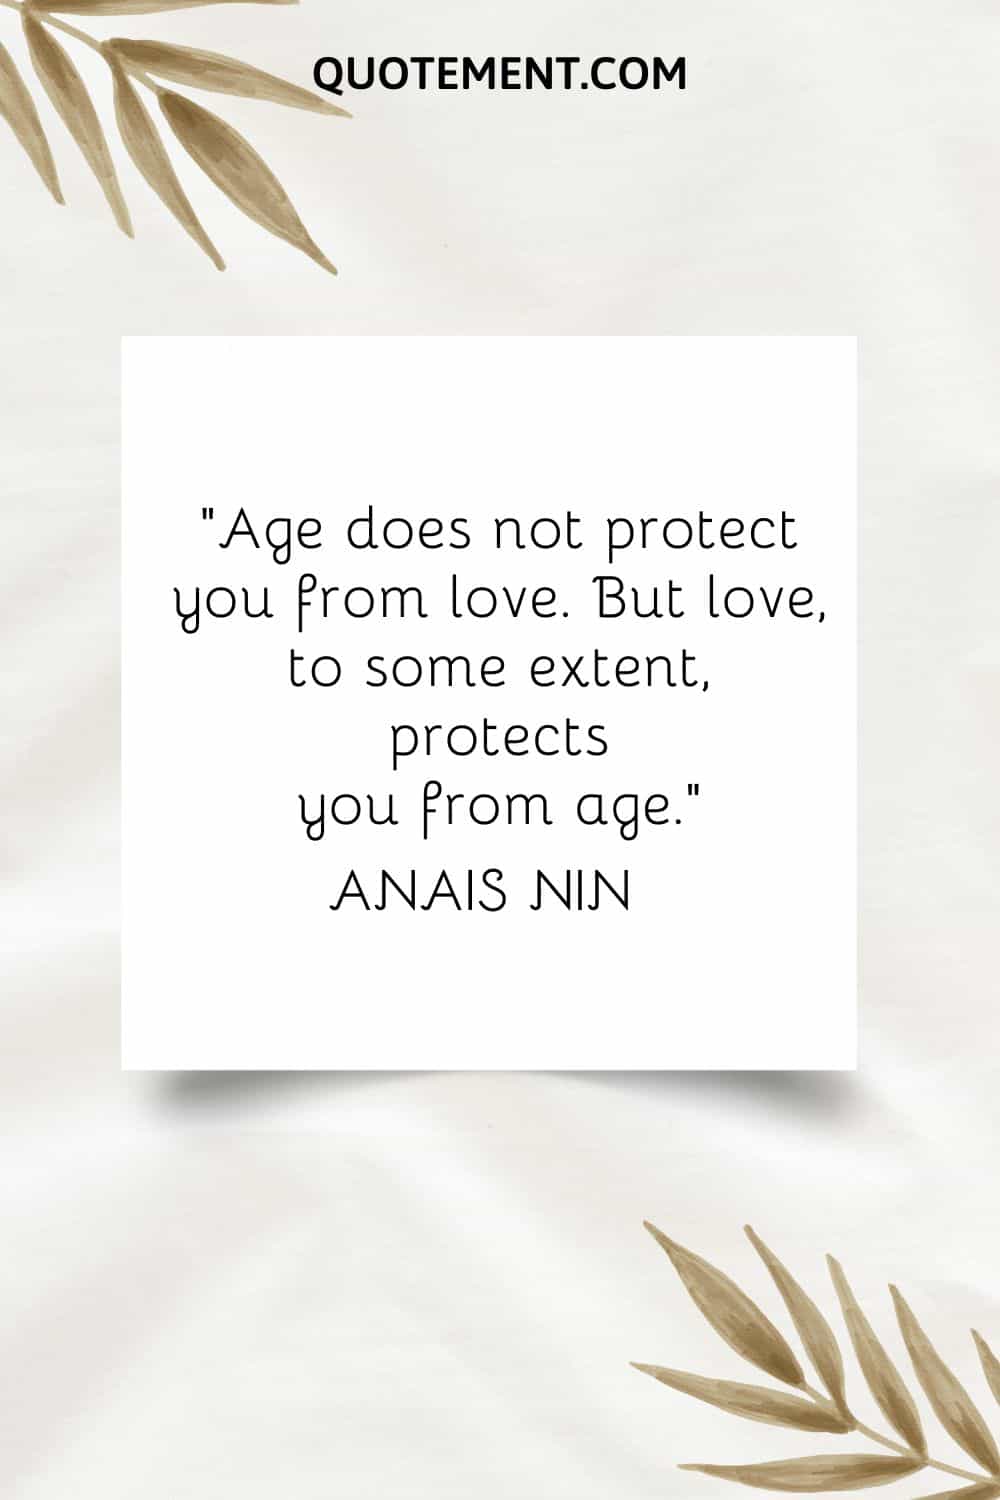 “Age does not protect you from love. But love, to some extent, protects you from age.” — Anais Nin